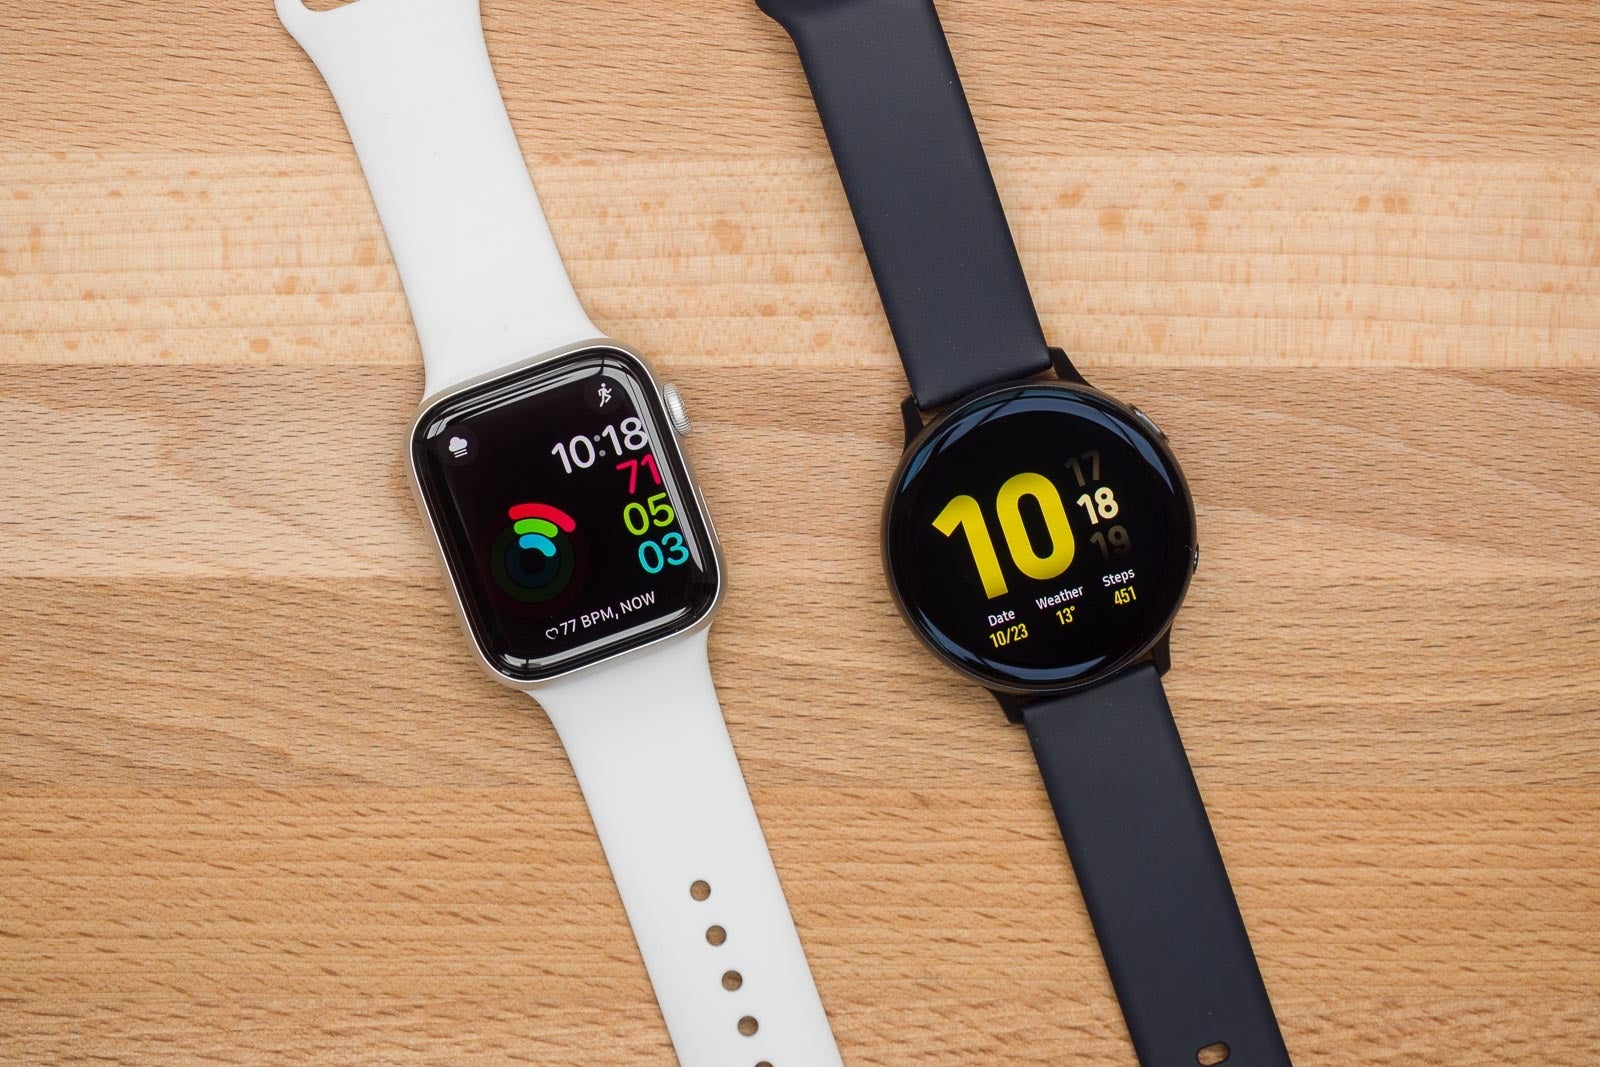 The Apple Watch and Samsung Galaxy Watch have been rivals for years now - Samsung starts closing the gap on Apple in the wearable market